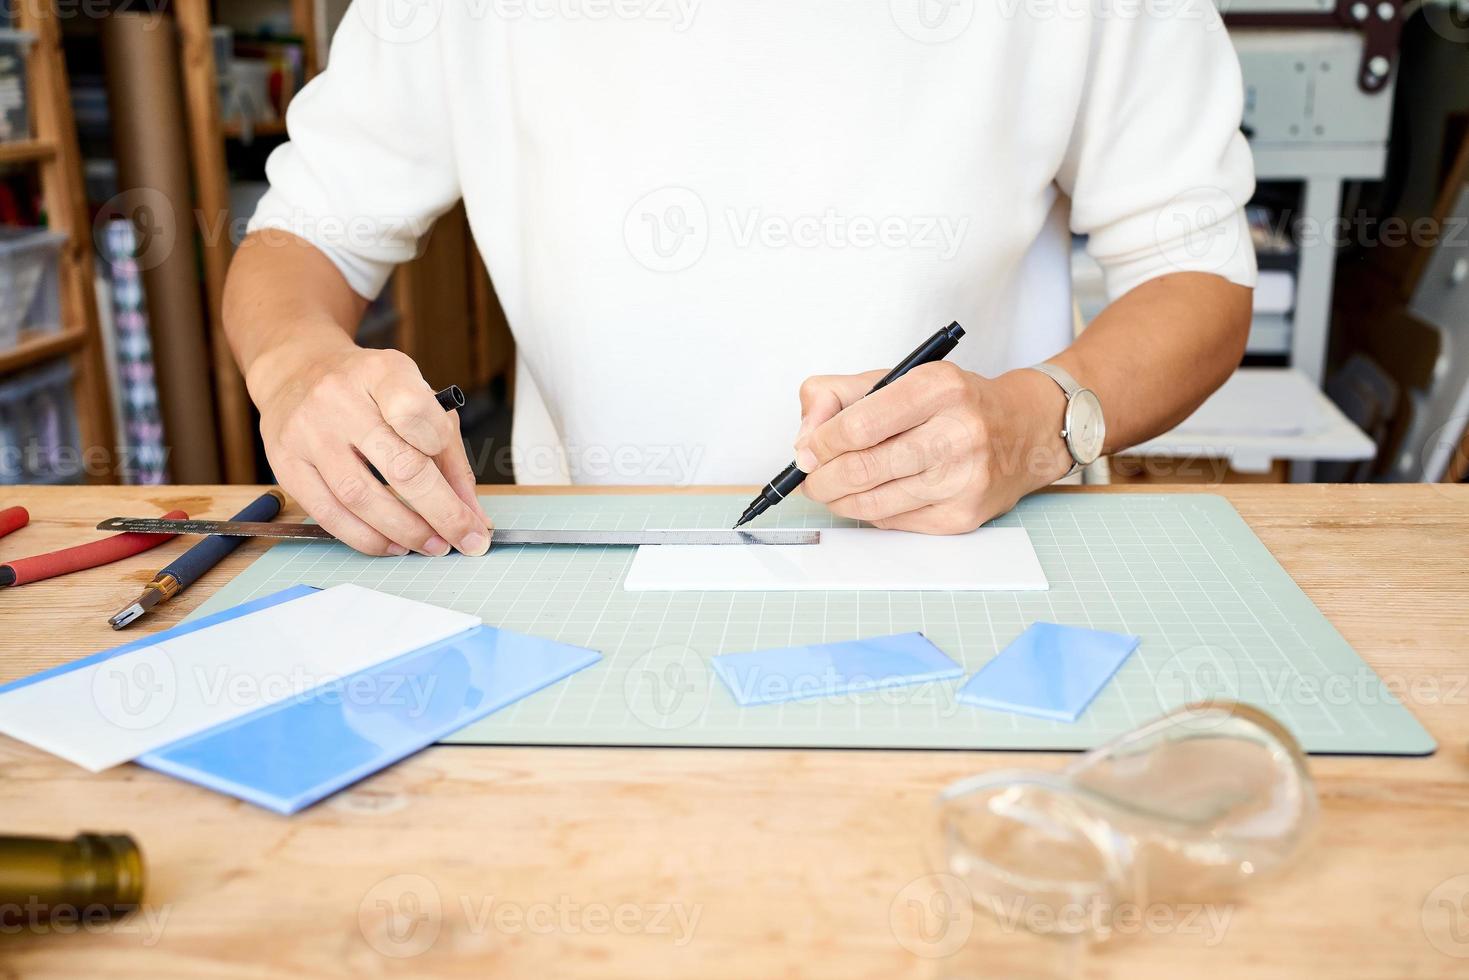 Faceless female entrepreneur cutting glass in artisan workroom. Business woman draws line photo